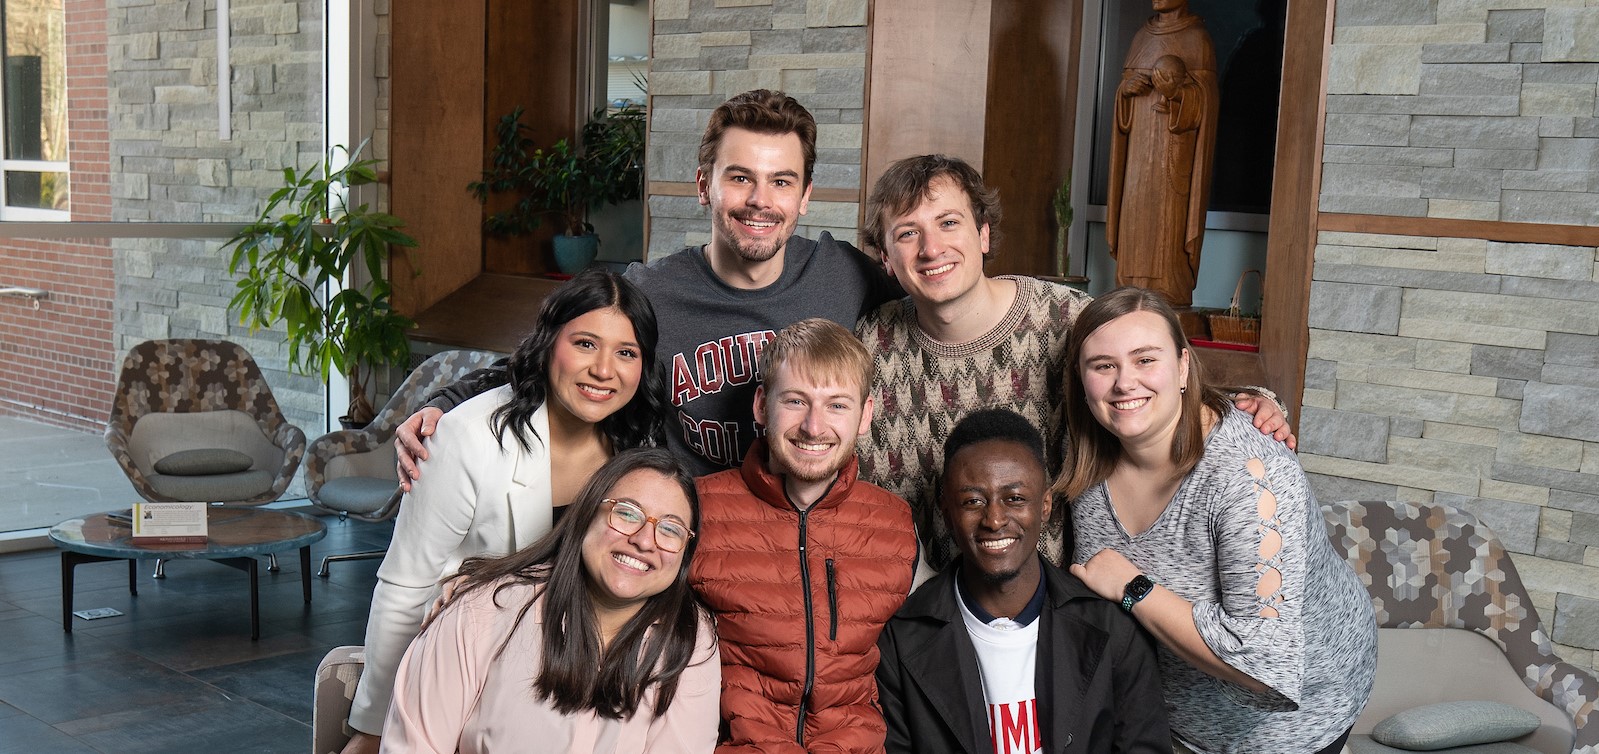 Seven of the students nominated for Senior Salute features for their work in the classroom, on campus, and in the community.